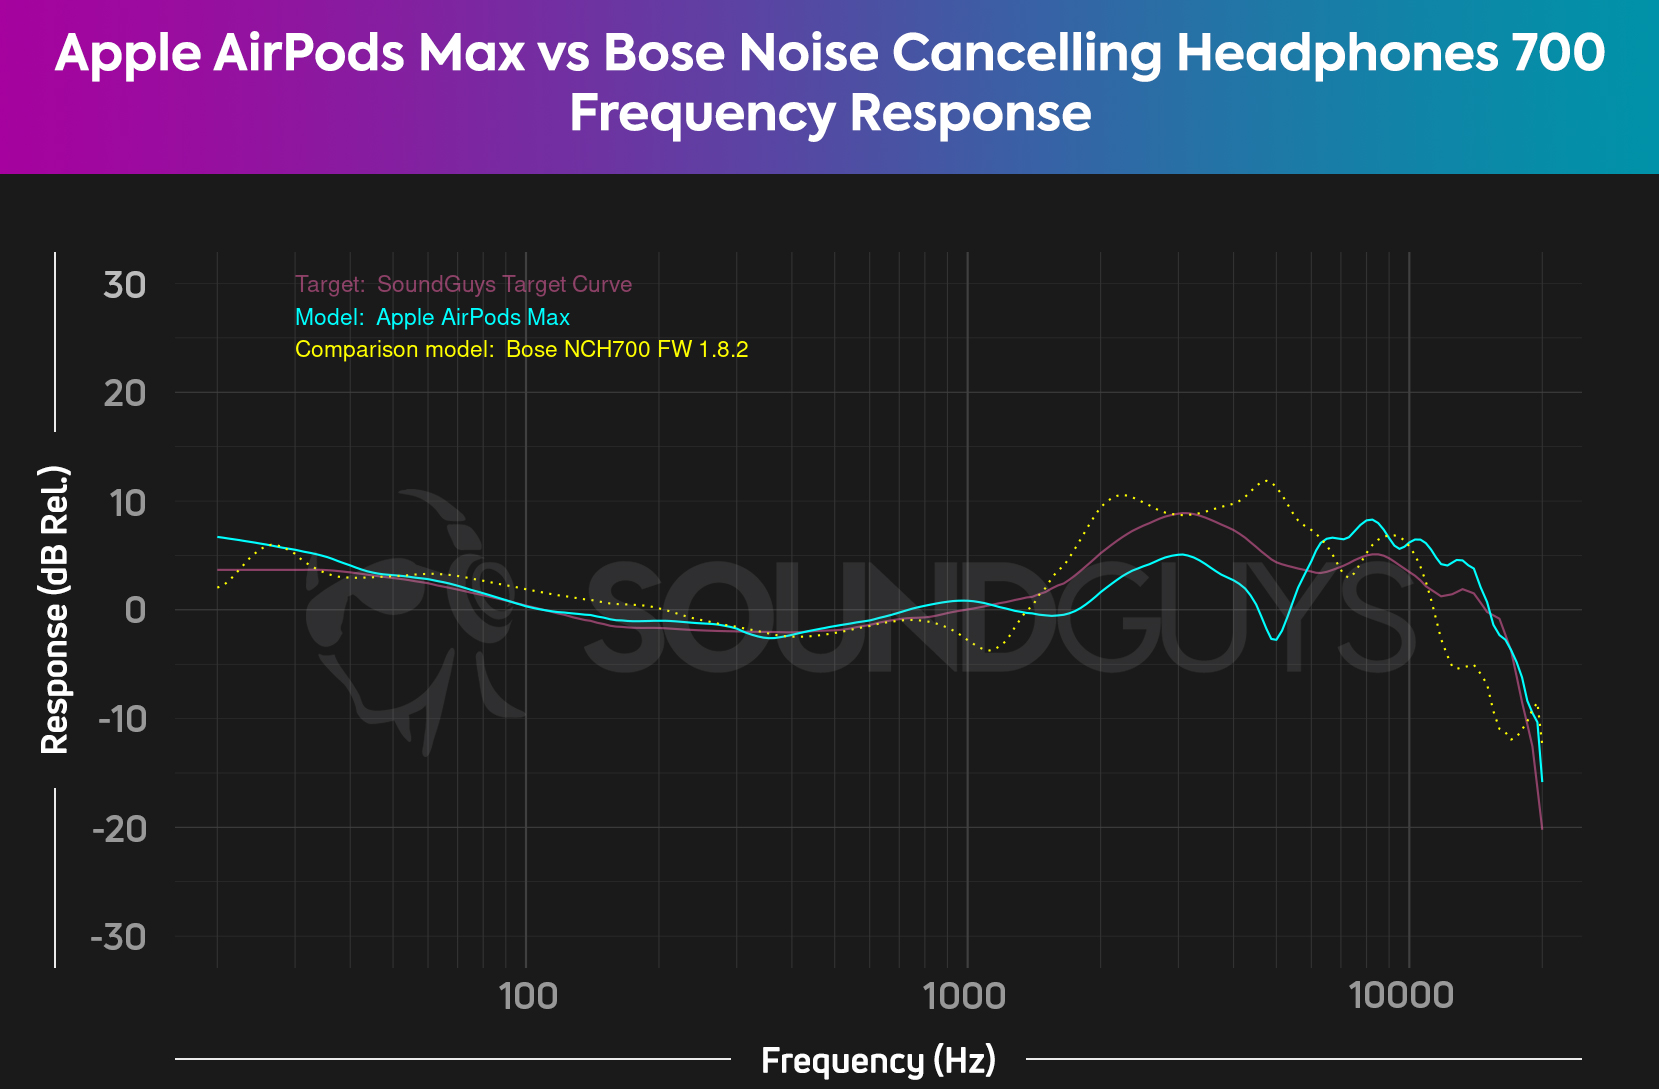 A comparison chart of the Apple AirPods Max vs Bose Noise Canceling Headphones 700 frequency responses, which shows the AirPods Max has a more consistent volume output across the frequency range (notably with treble sounds) compared to the Bose NCH 700.